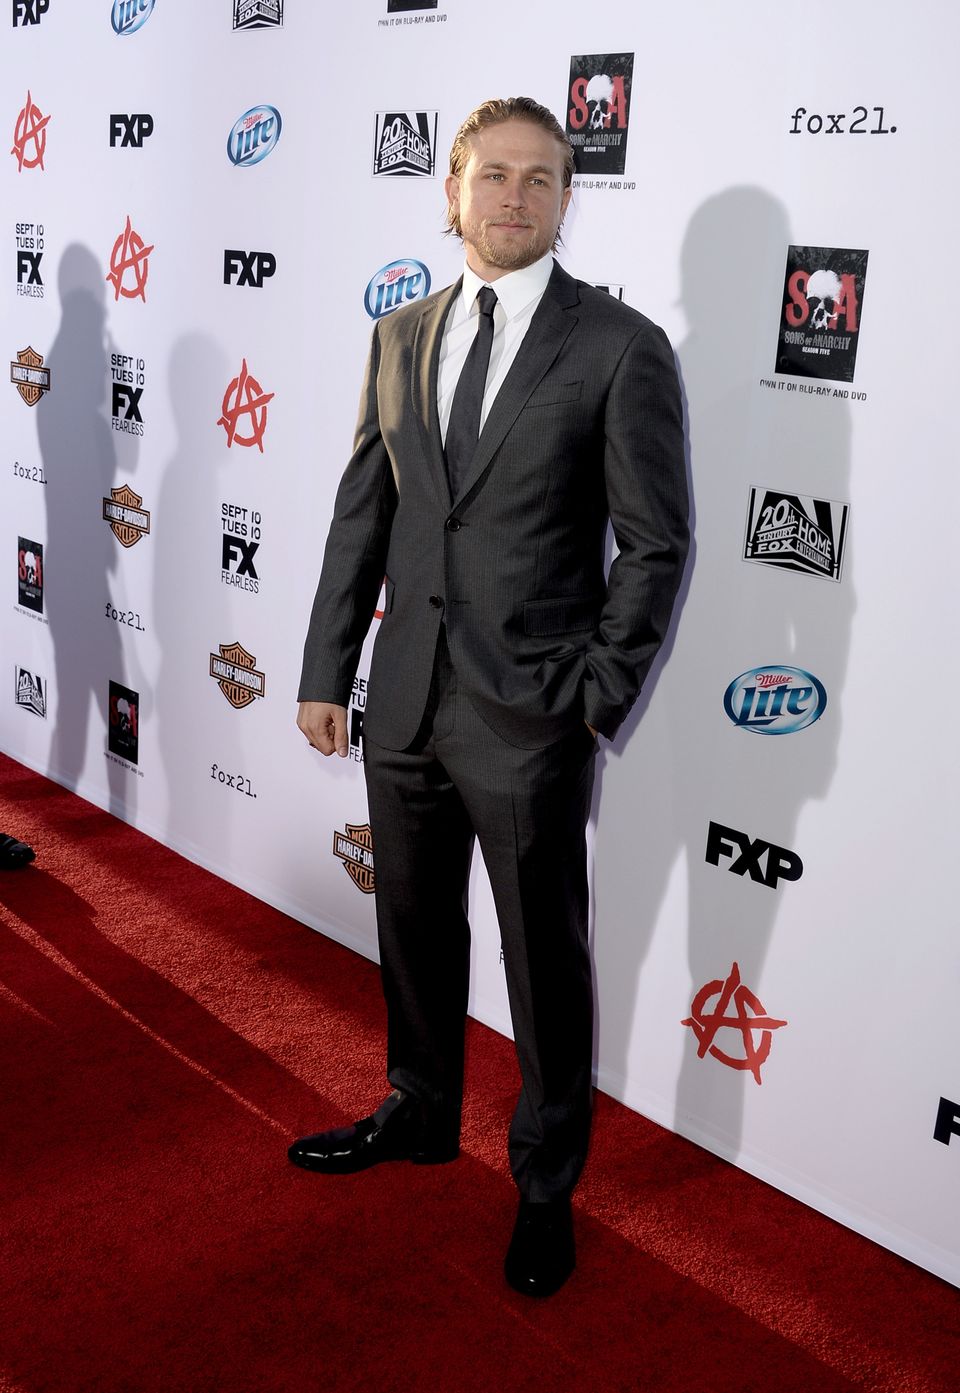 Premiere Of FX's "Sons Of Anarchy" Season 6 - Red Carpet